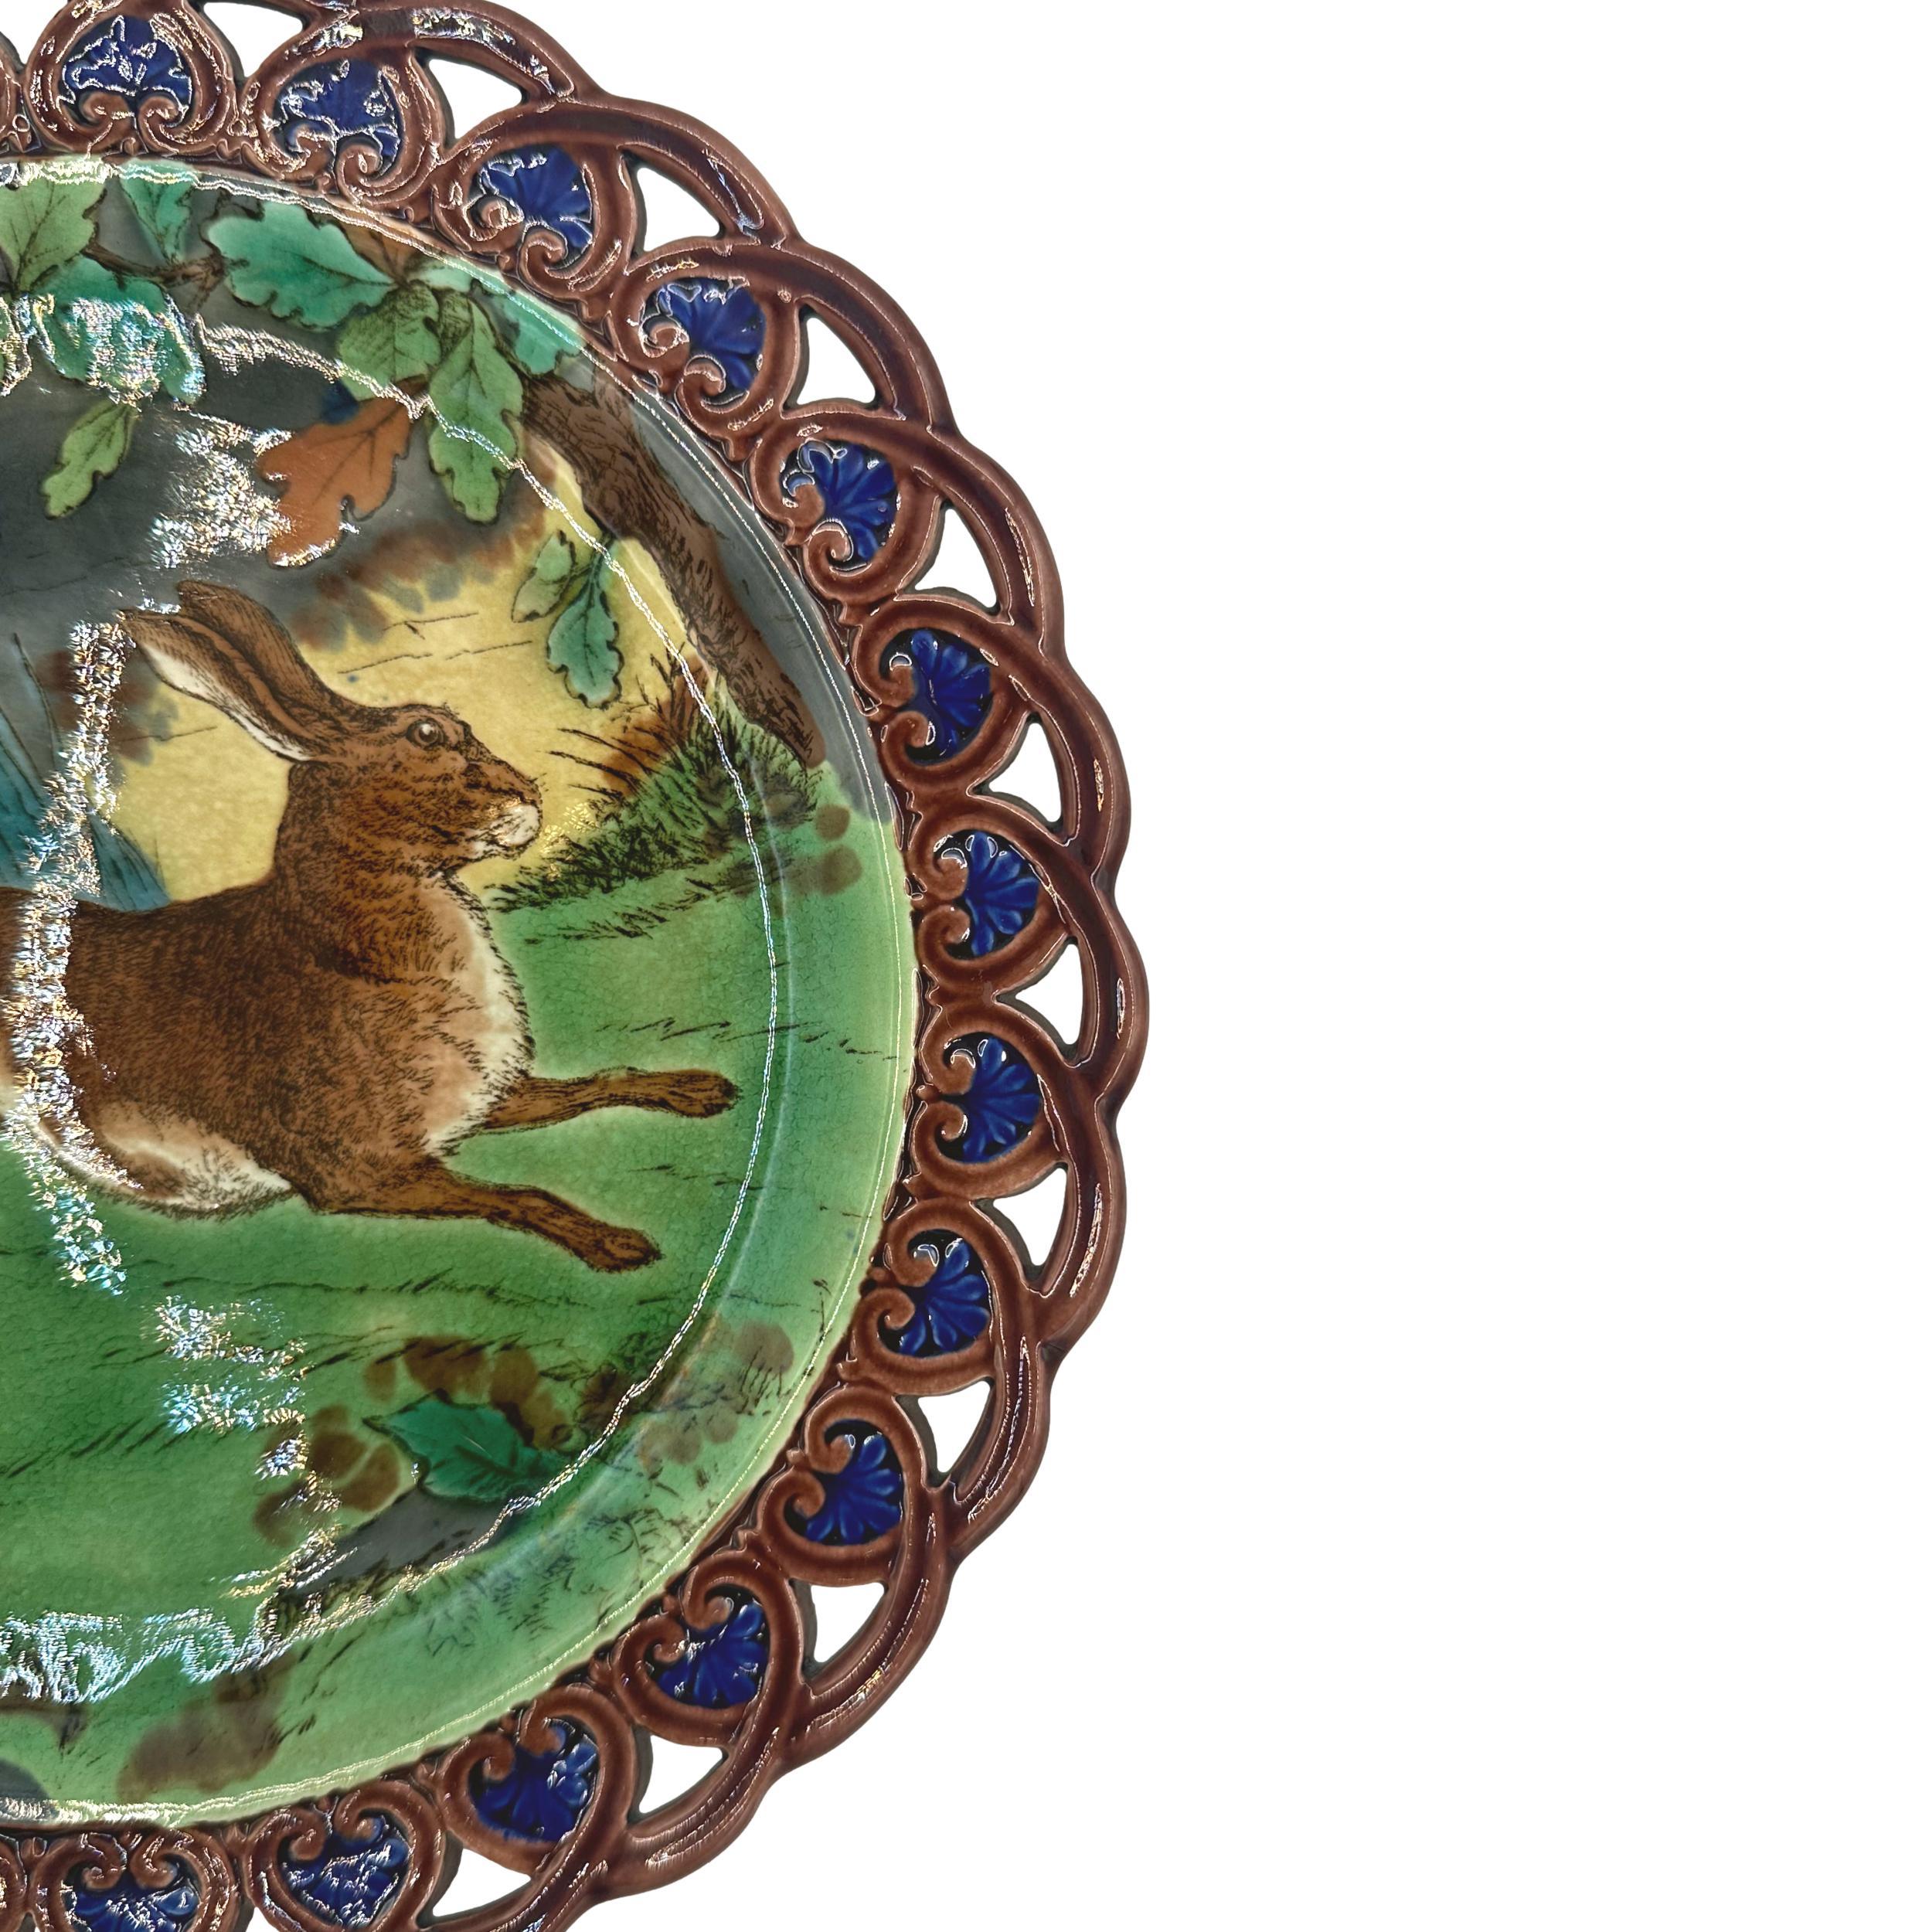 Molded A Wedgwood Majolica Hare Game Cabinet Plate, Reticulated, English, 1877